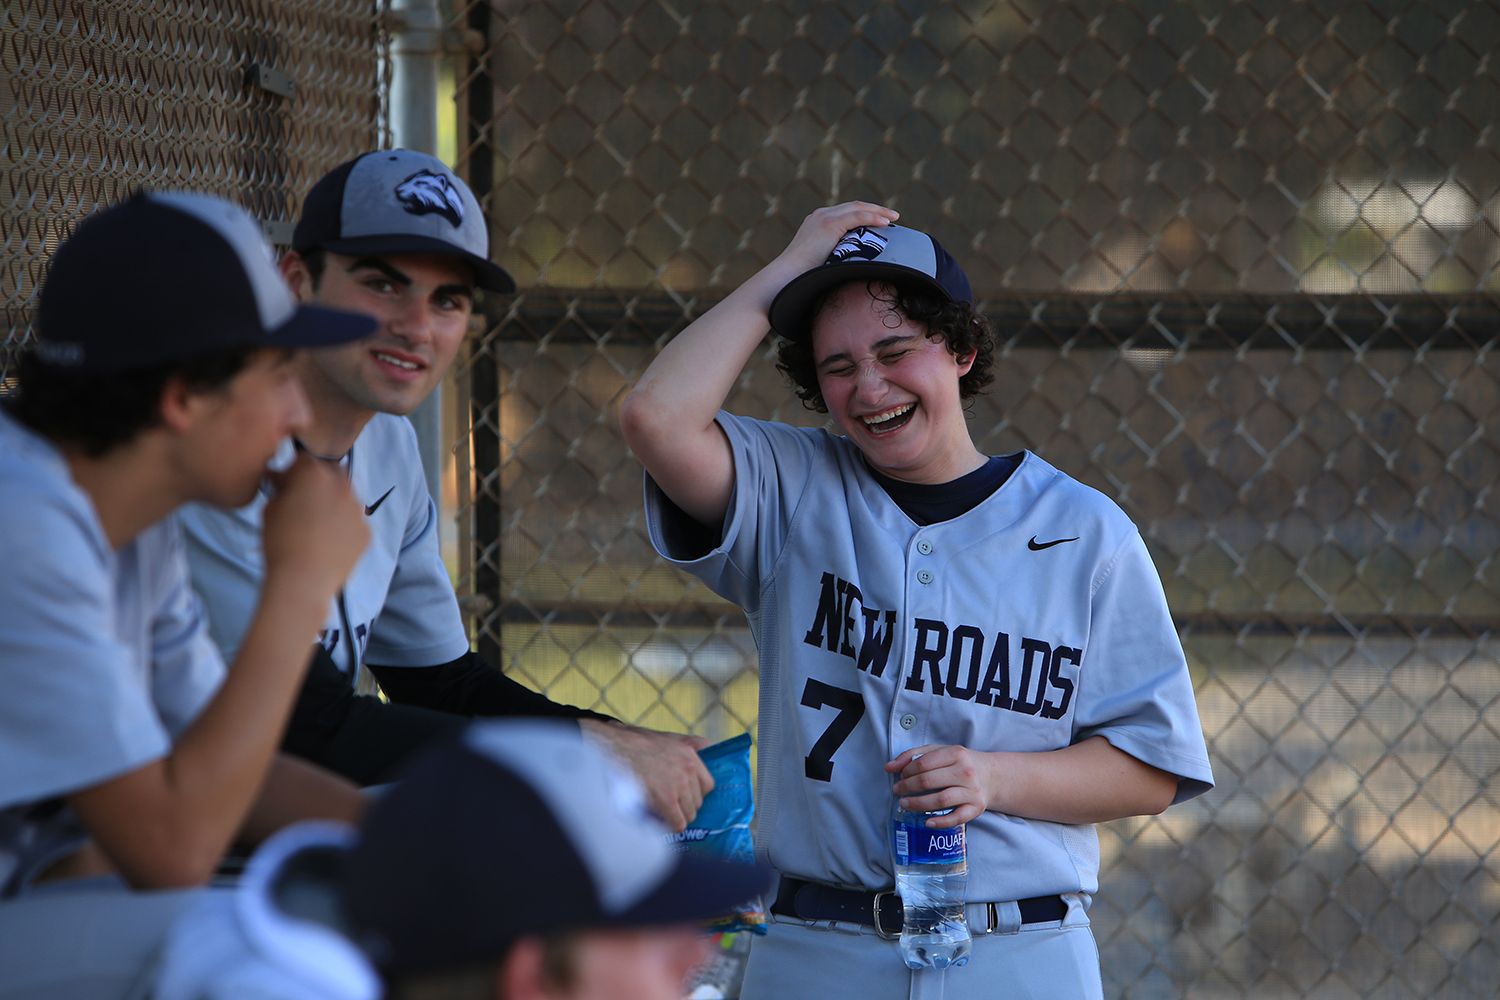  Jake Hofheimer, right, 17-year-old transgender male plays second baseman and outfielder on the New Roads Jaguars baseball team,&nbsp;jokes around with friend, Jake Boyle, center. © Gail Fisher for ESPN 